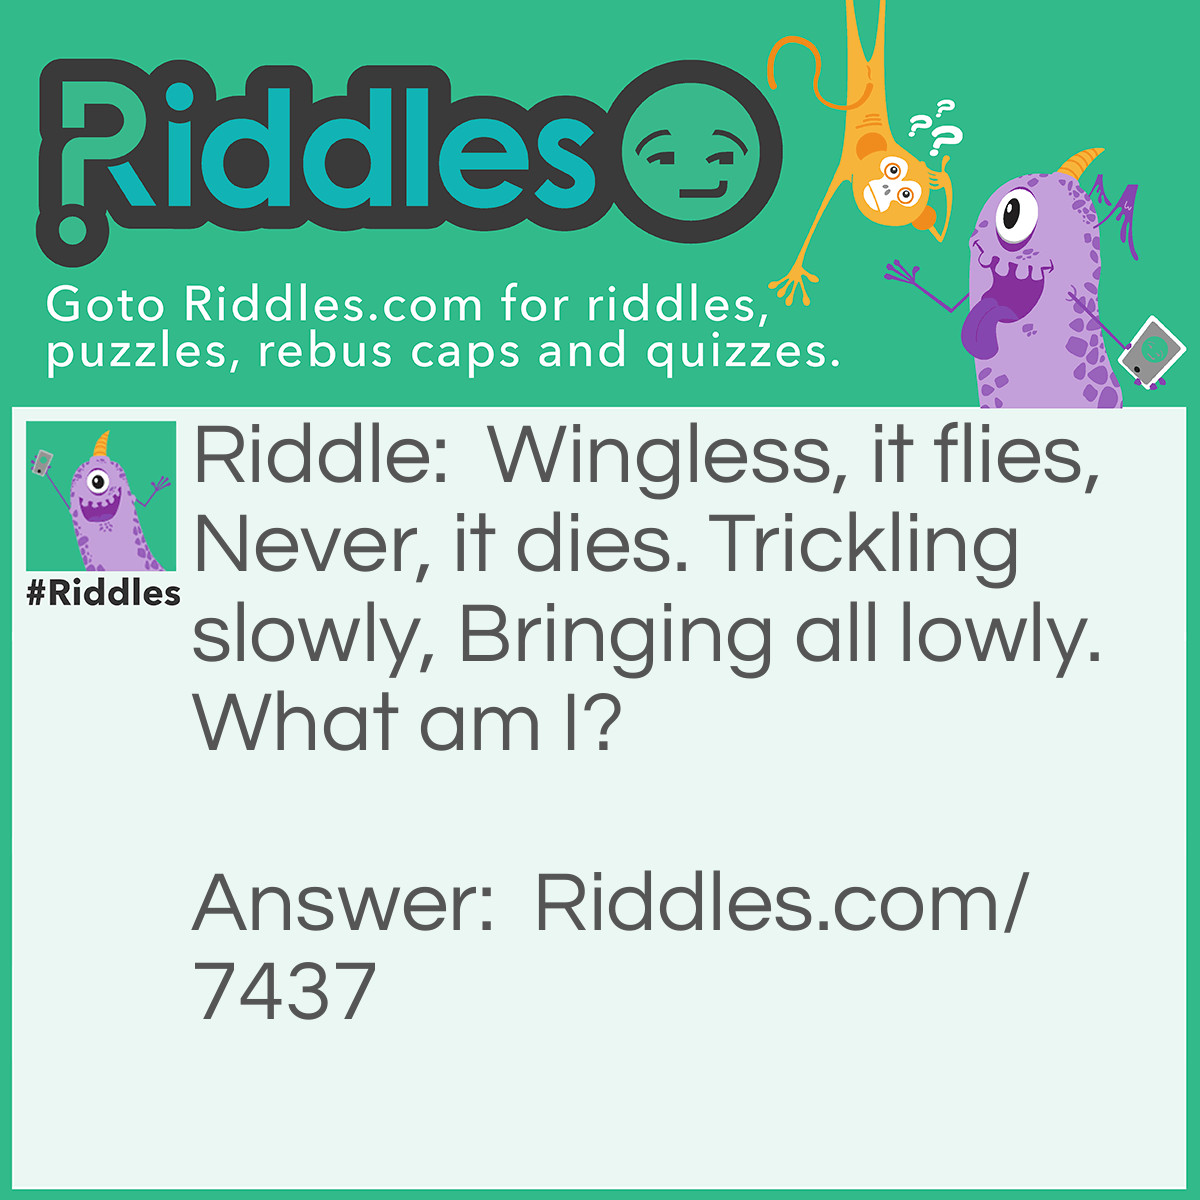 Riddle: Wingless, it flies, Never, it dies. Trickling slowly, Bringing all lowly. What am I? Answer: "Time" - Reasoning: Time can both fly by and trickle slowly, depending on how exciting or boring a situation is. It doesn't die, which hints that its not a physical entity, more an idea. And "bringing all lowly" represents how all things decay and fall into a state of entropy over time.